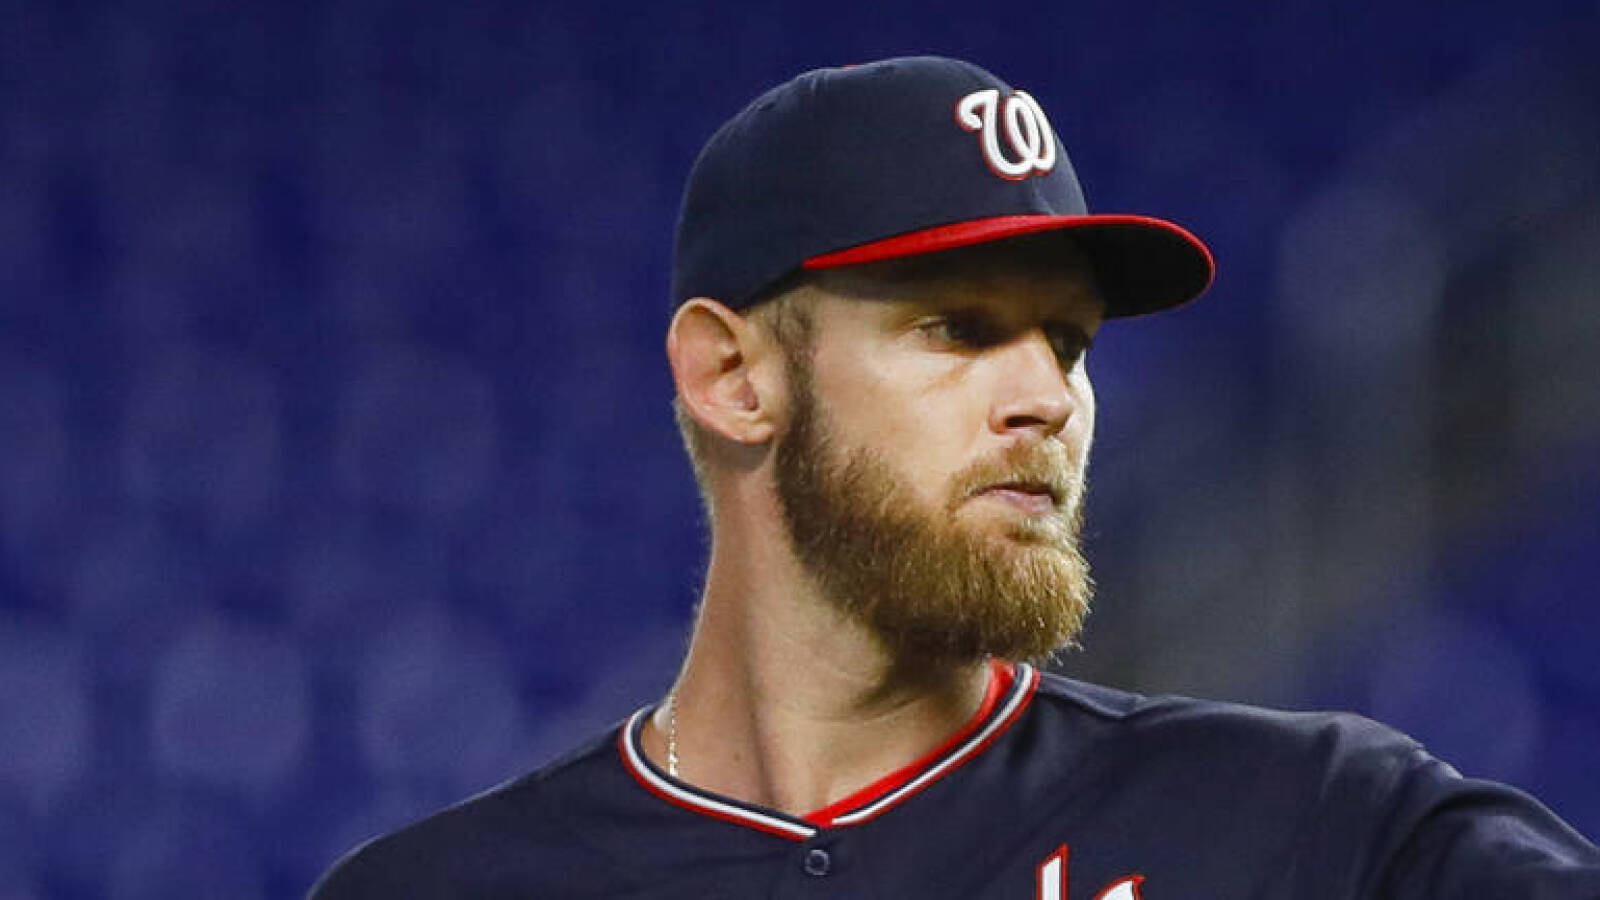 Nationals' Stephen Strasburg suffers setback, timetable for return unclear